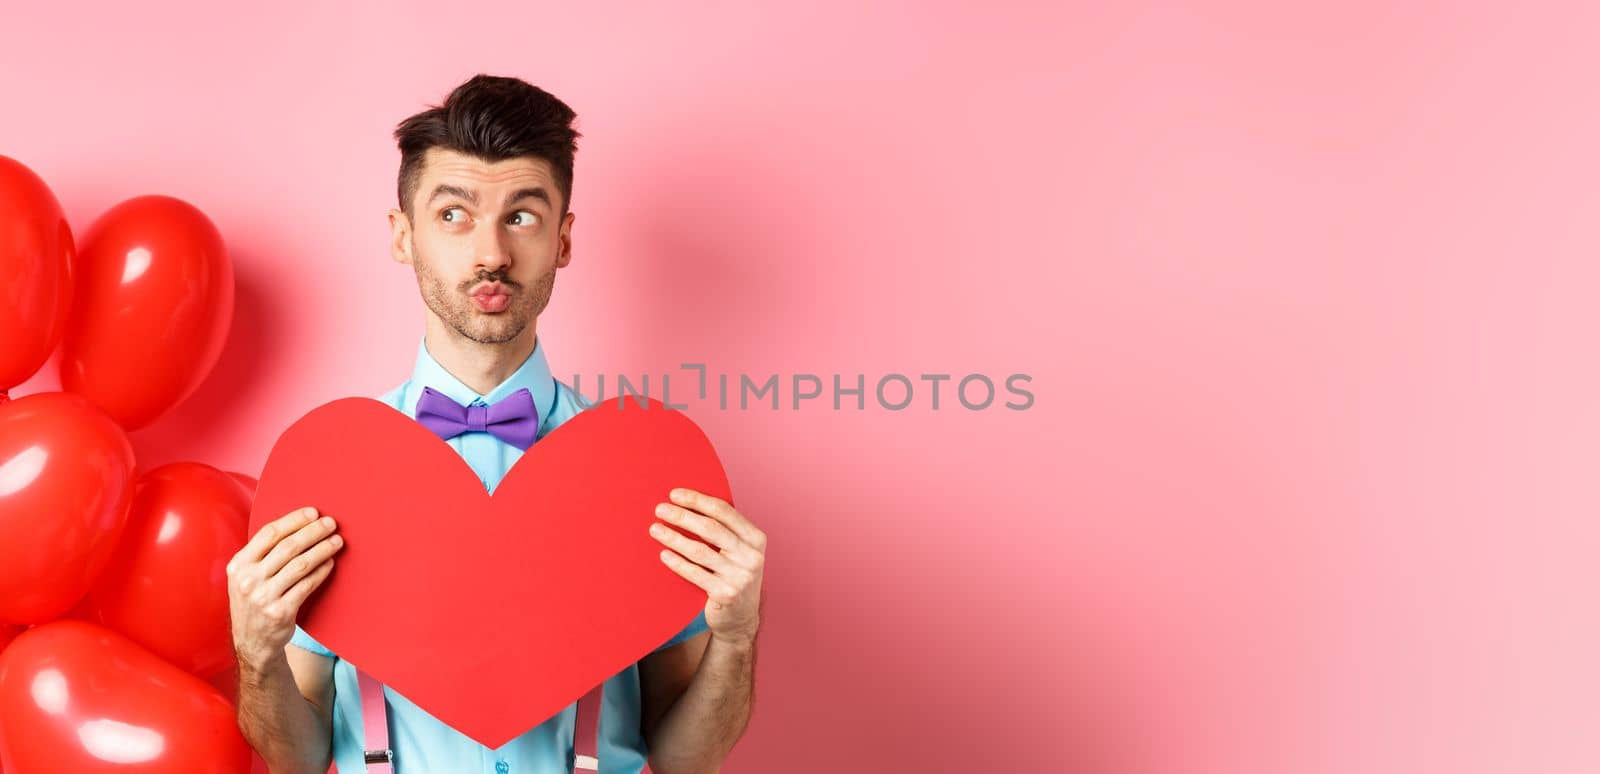 Valentines day concept. Charming young man in bowtie waiting for soulmate with big red heart cutout, looking left and dream of love, pink background.